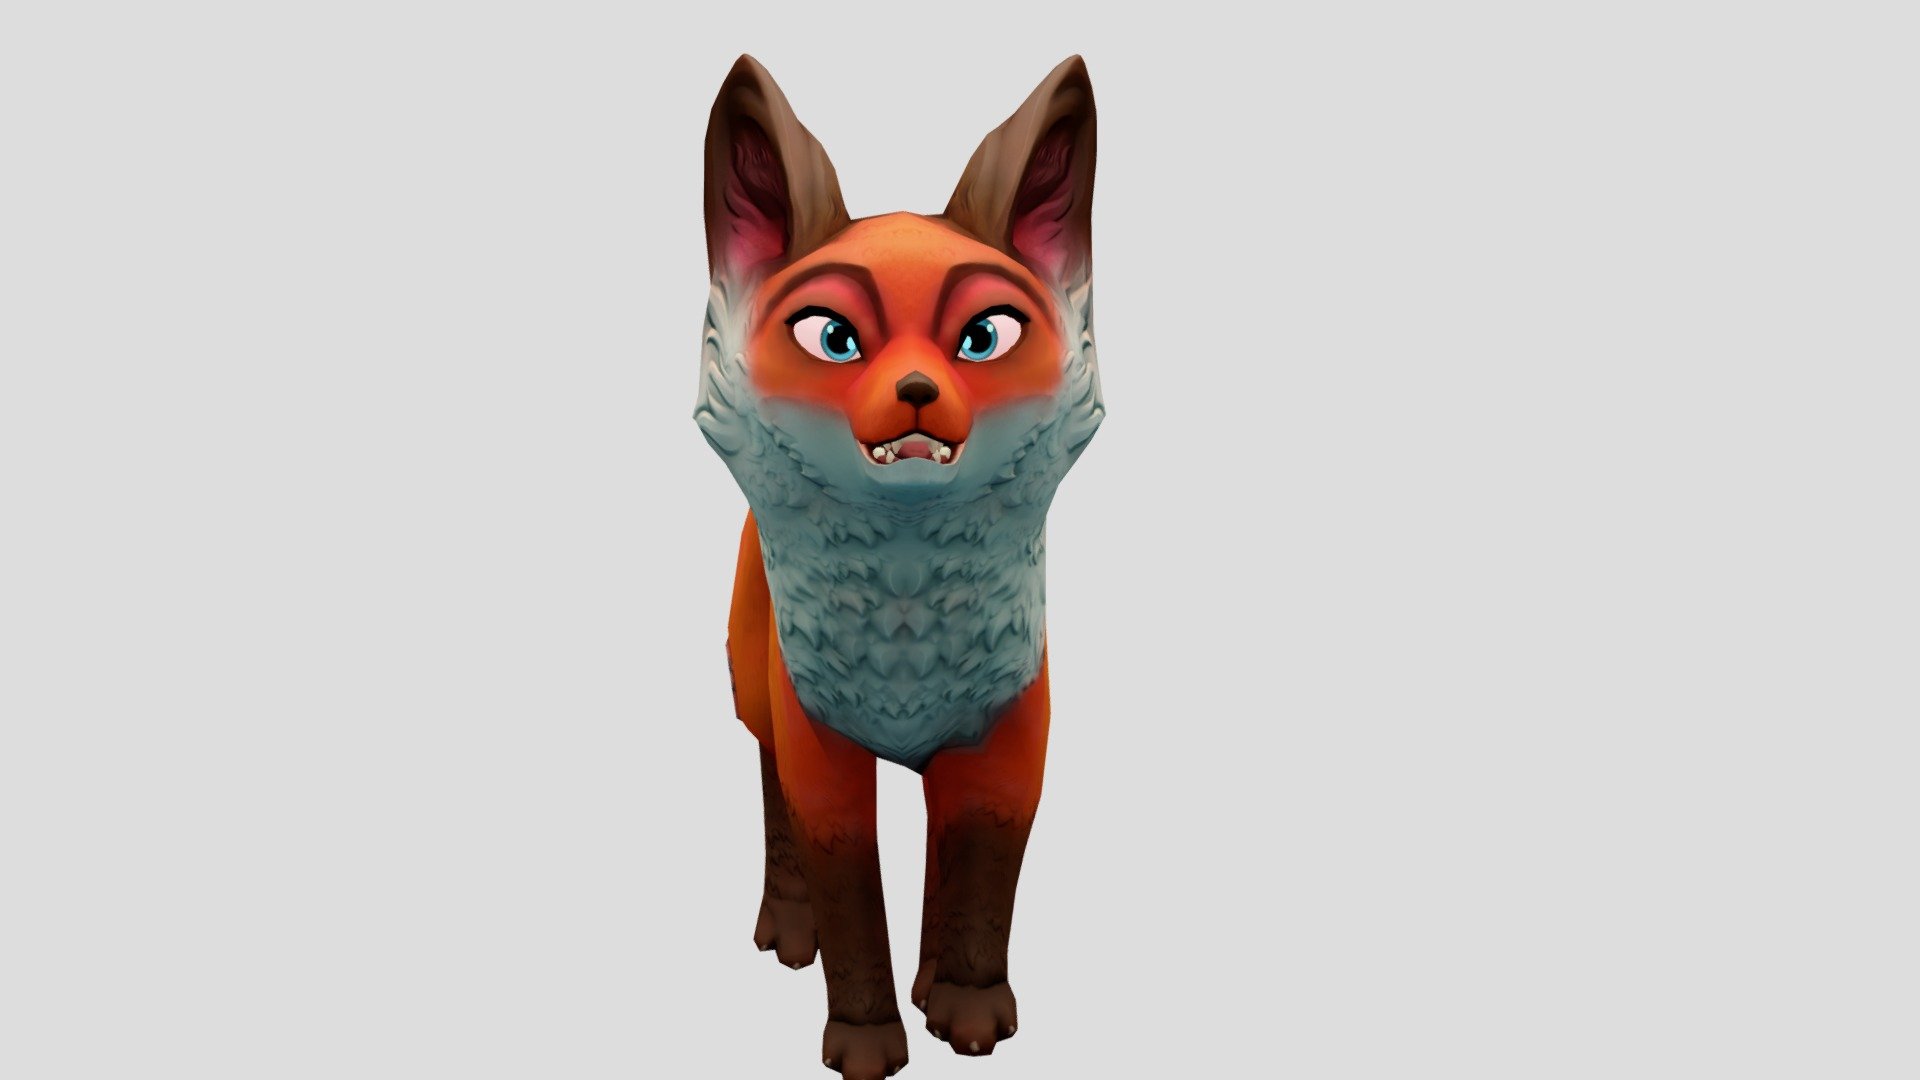 Personal project to test and improve my skills with rigging and animation. I made this fox model in Zbrush,(sculp and detailing) after this I import this model in maya to retopo and opening UV's, I Prefer Substance painter and Photoshop to Bake and Texturing. After the model was finished with the texture maps ready, I went back to Maya to do the rigging and animating, exported to Marmoset toolbag to test some lighting pressets and scene composition.

Info Tecs: 3.5k tris
Body Maps: Albedo,Roughness/Metalness and Normal Map: 2048x2048 
Eyes Mapas: Albedo,Roughness/Metalness and Normal Map: 512x512

I hope you enjoy :)

Artstation: Guii_3D - Fox - Buy Royalty Free 3D model by guilhermewalker (@guilhermewalker.ink) 3d model